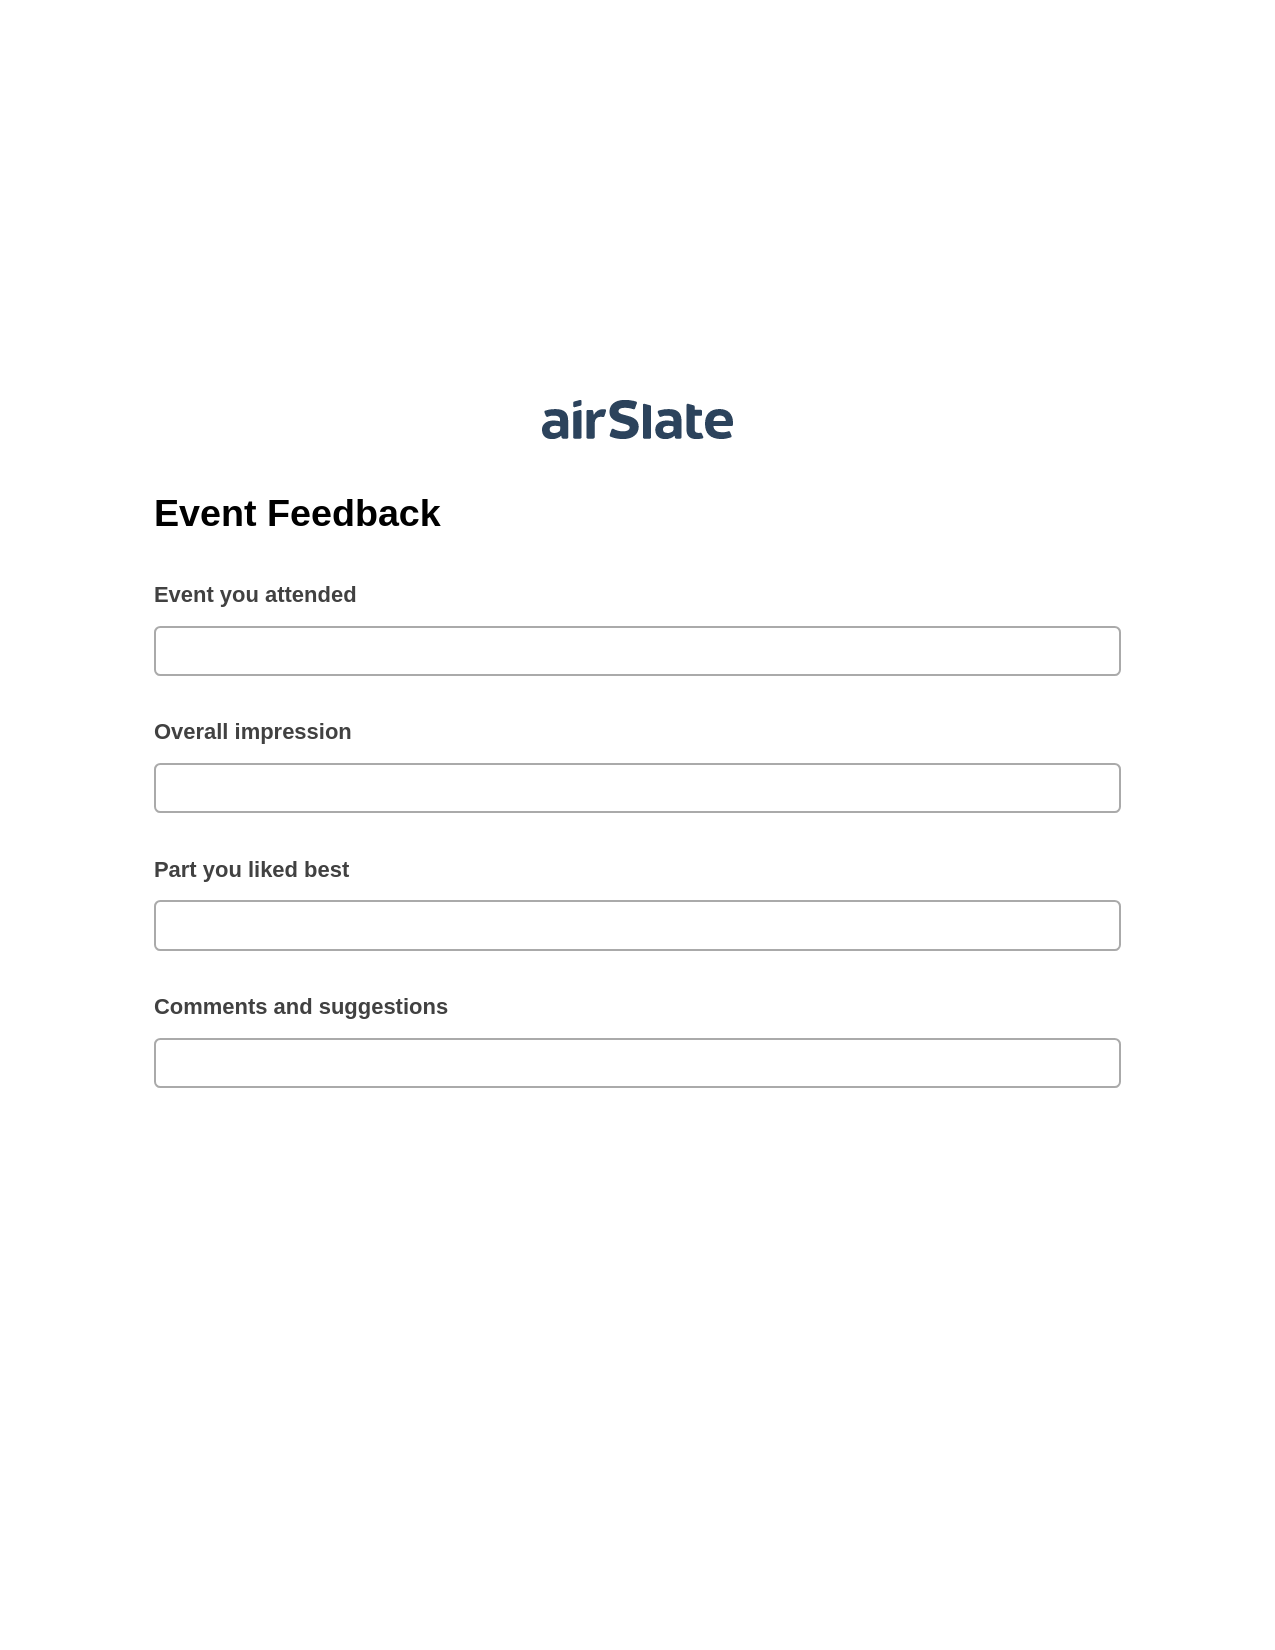 Multirole Event Feedback Pre-fill from another Slate Bot, Lock the slate bot, Export to Smartsheet